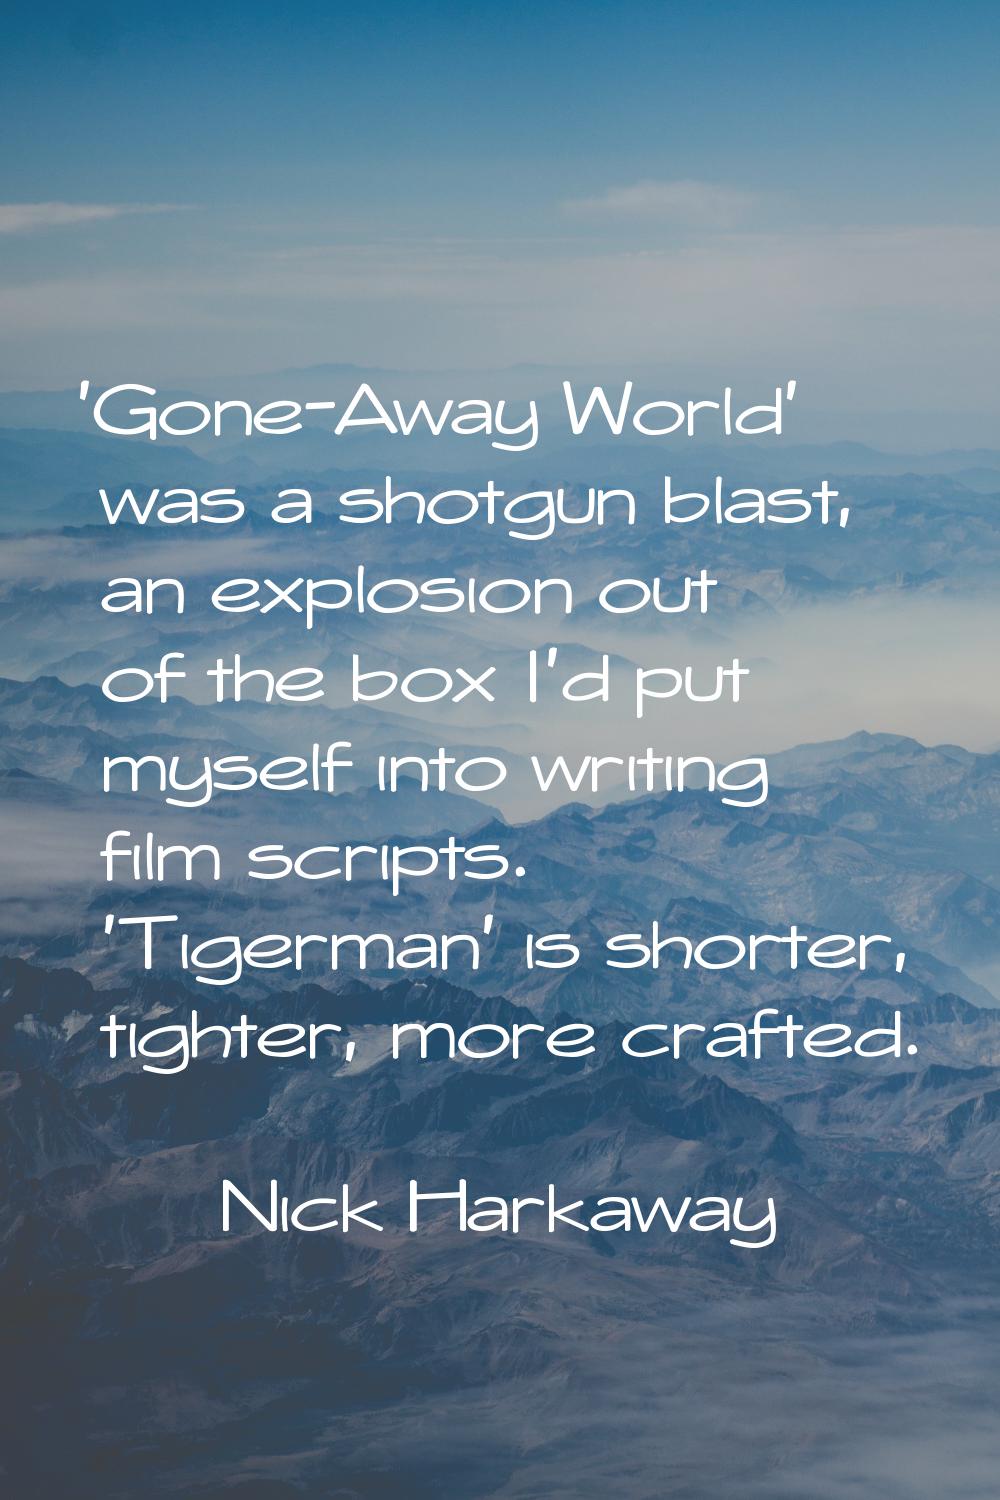 'Gone-Away World' was a shotgun blast, an explosion out of the box I'd put myself into writing film